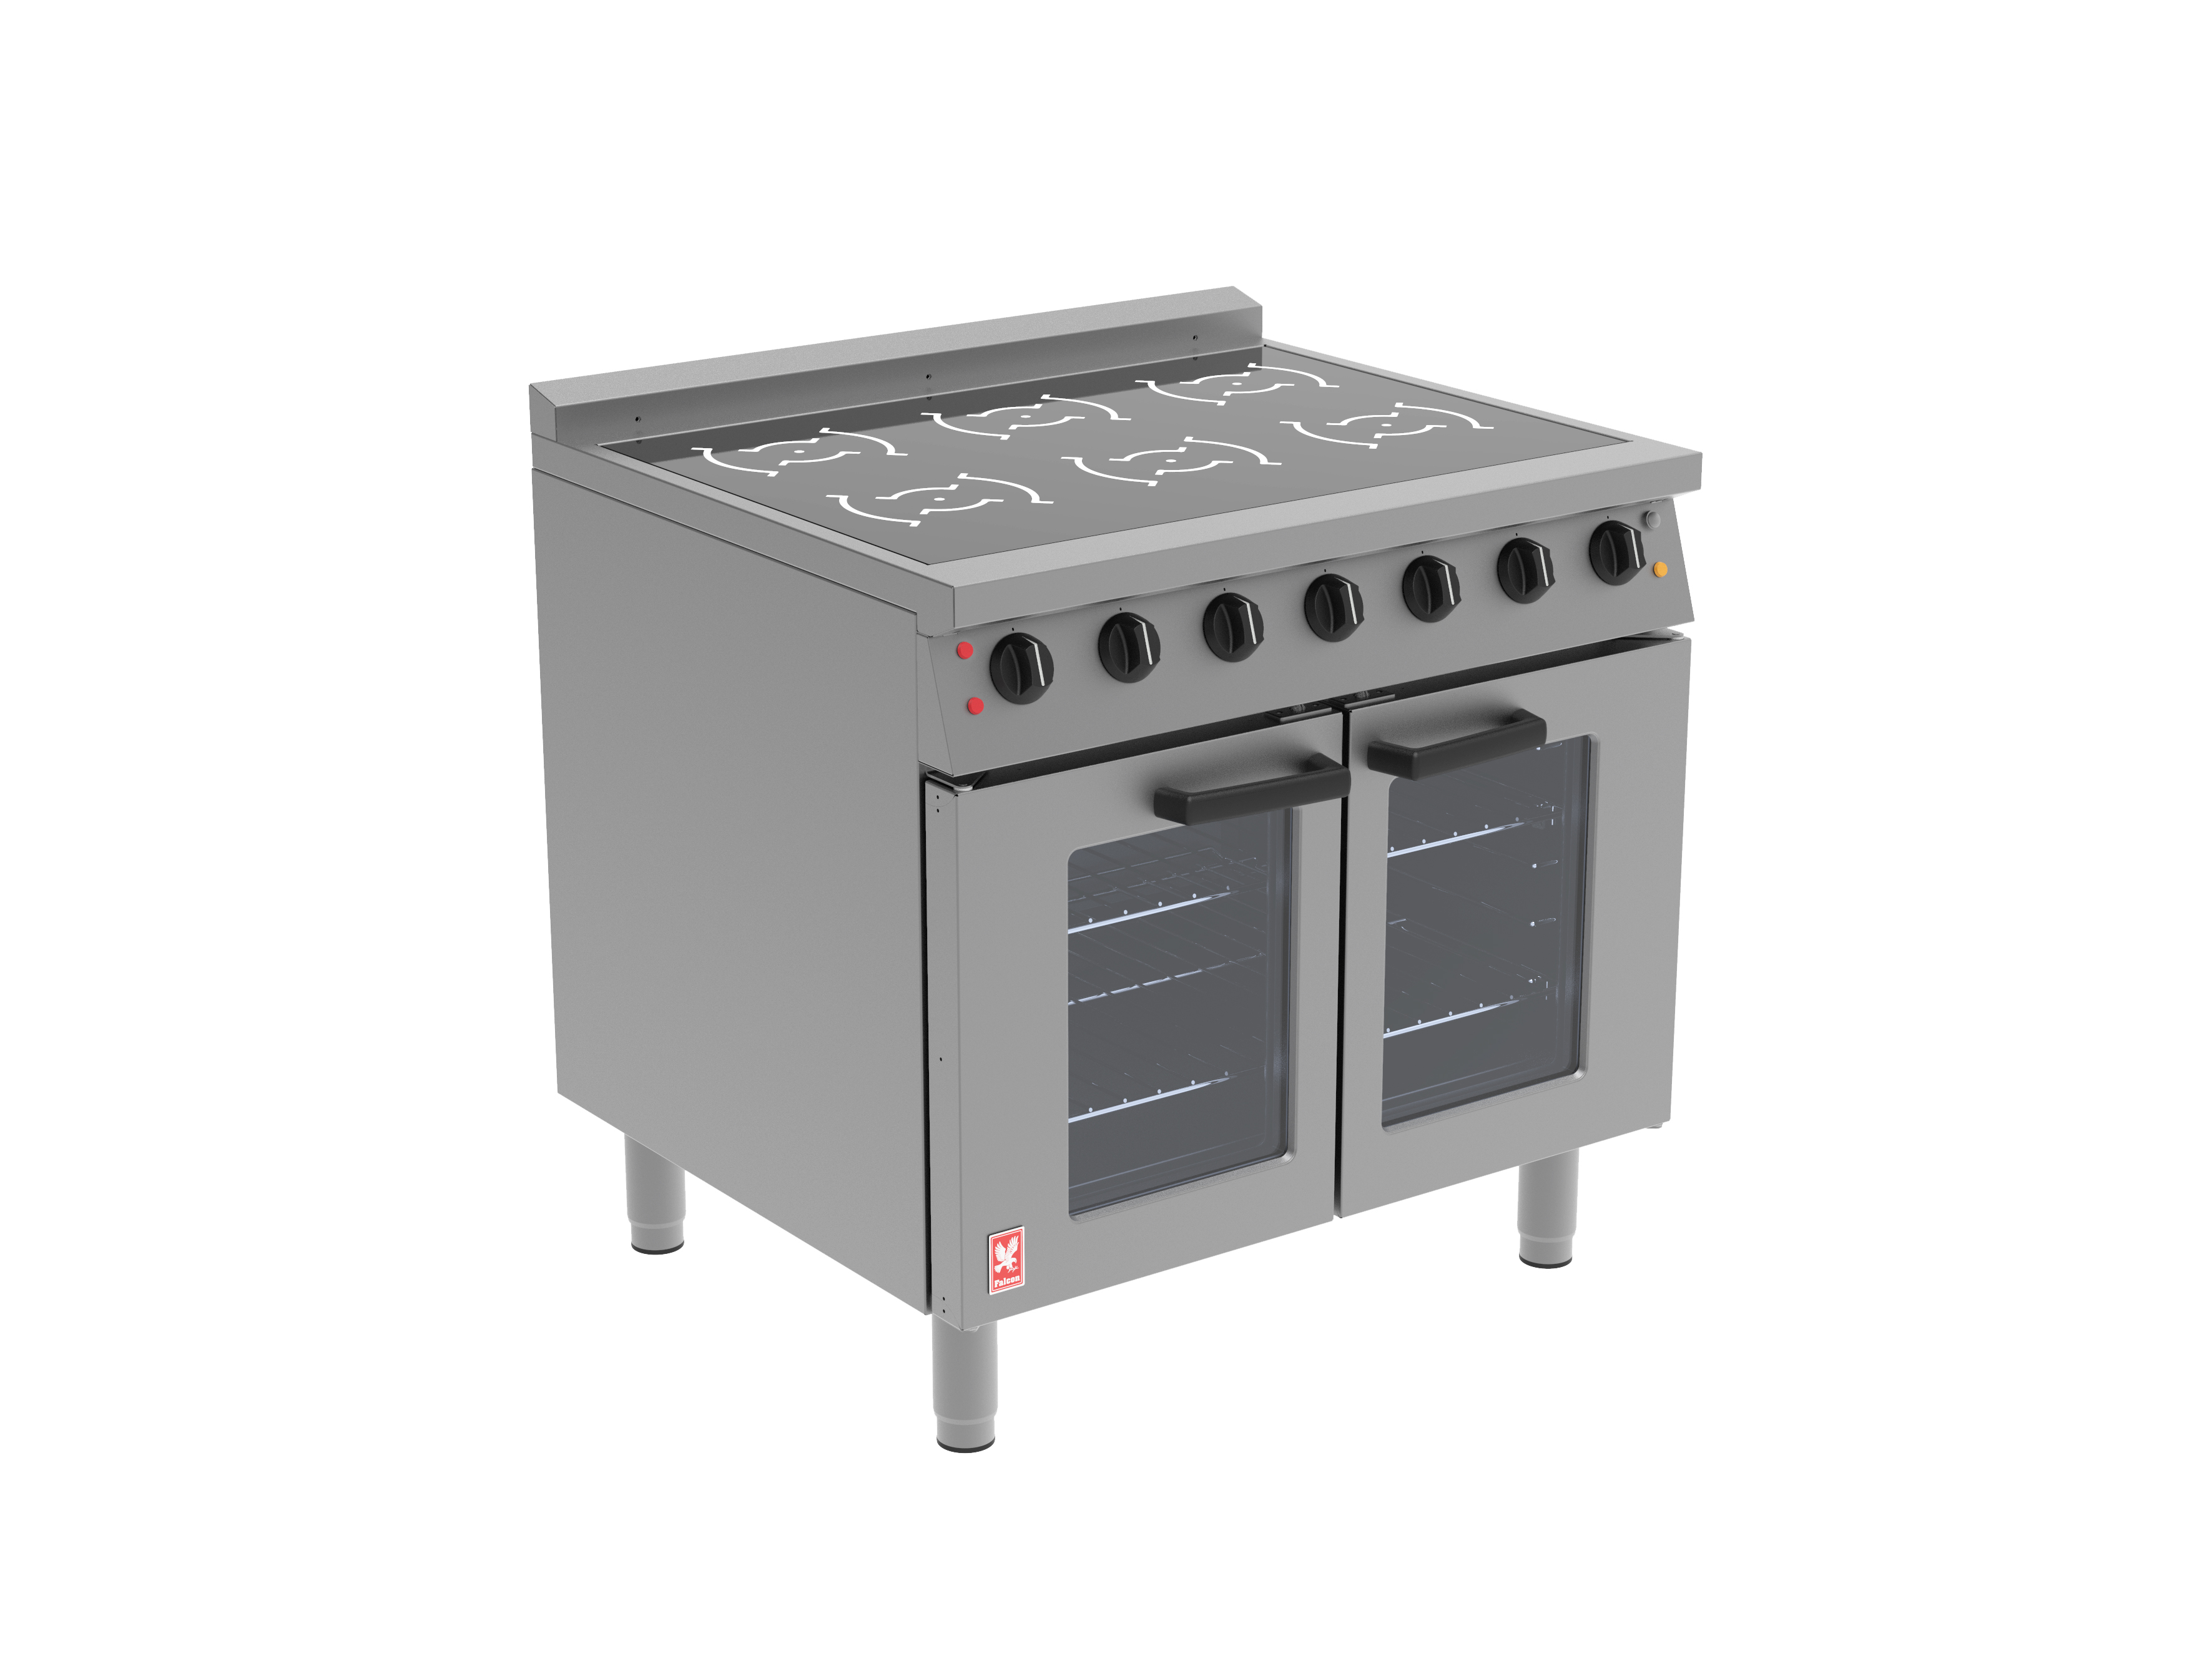 Falcon’s latest induction range is the One